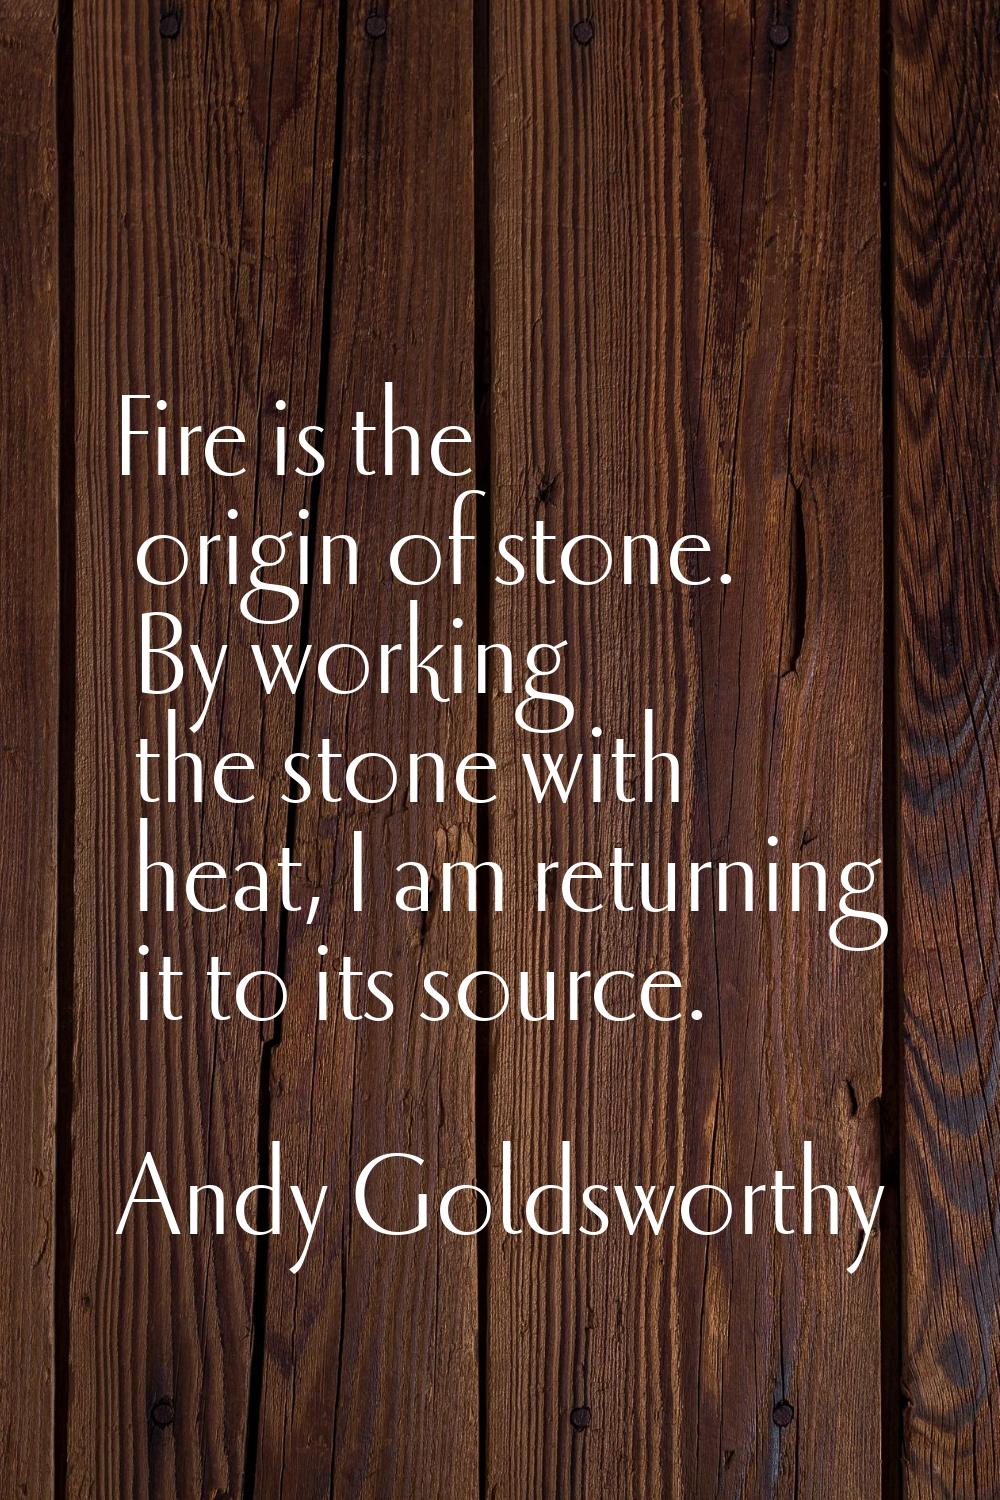 Fire is the origin of stone. By working the stone with heat, I am returning it to its source.